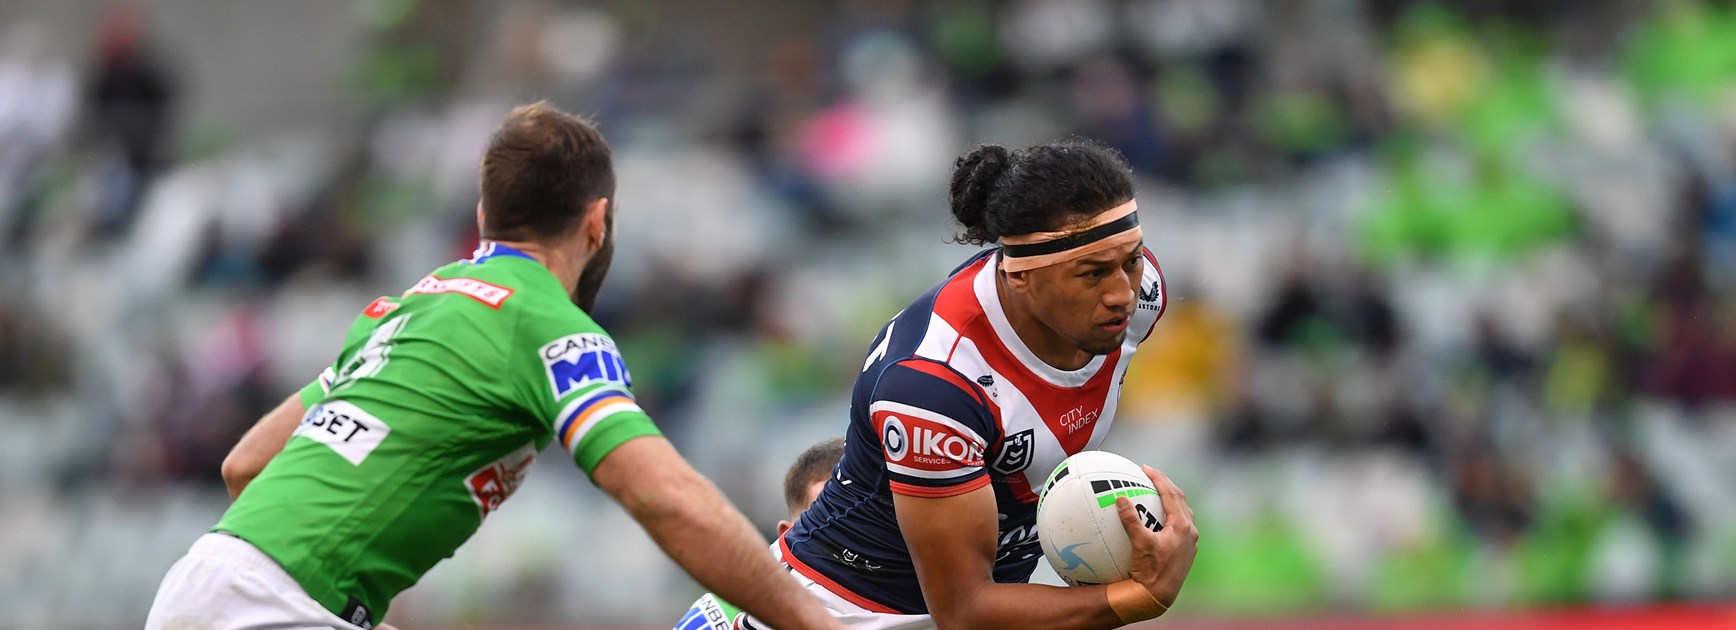 Easts' Efforts Unable to Secure Points in Canberra